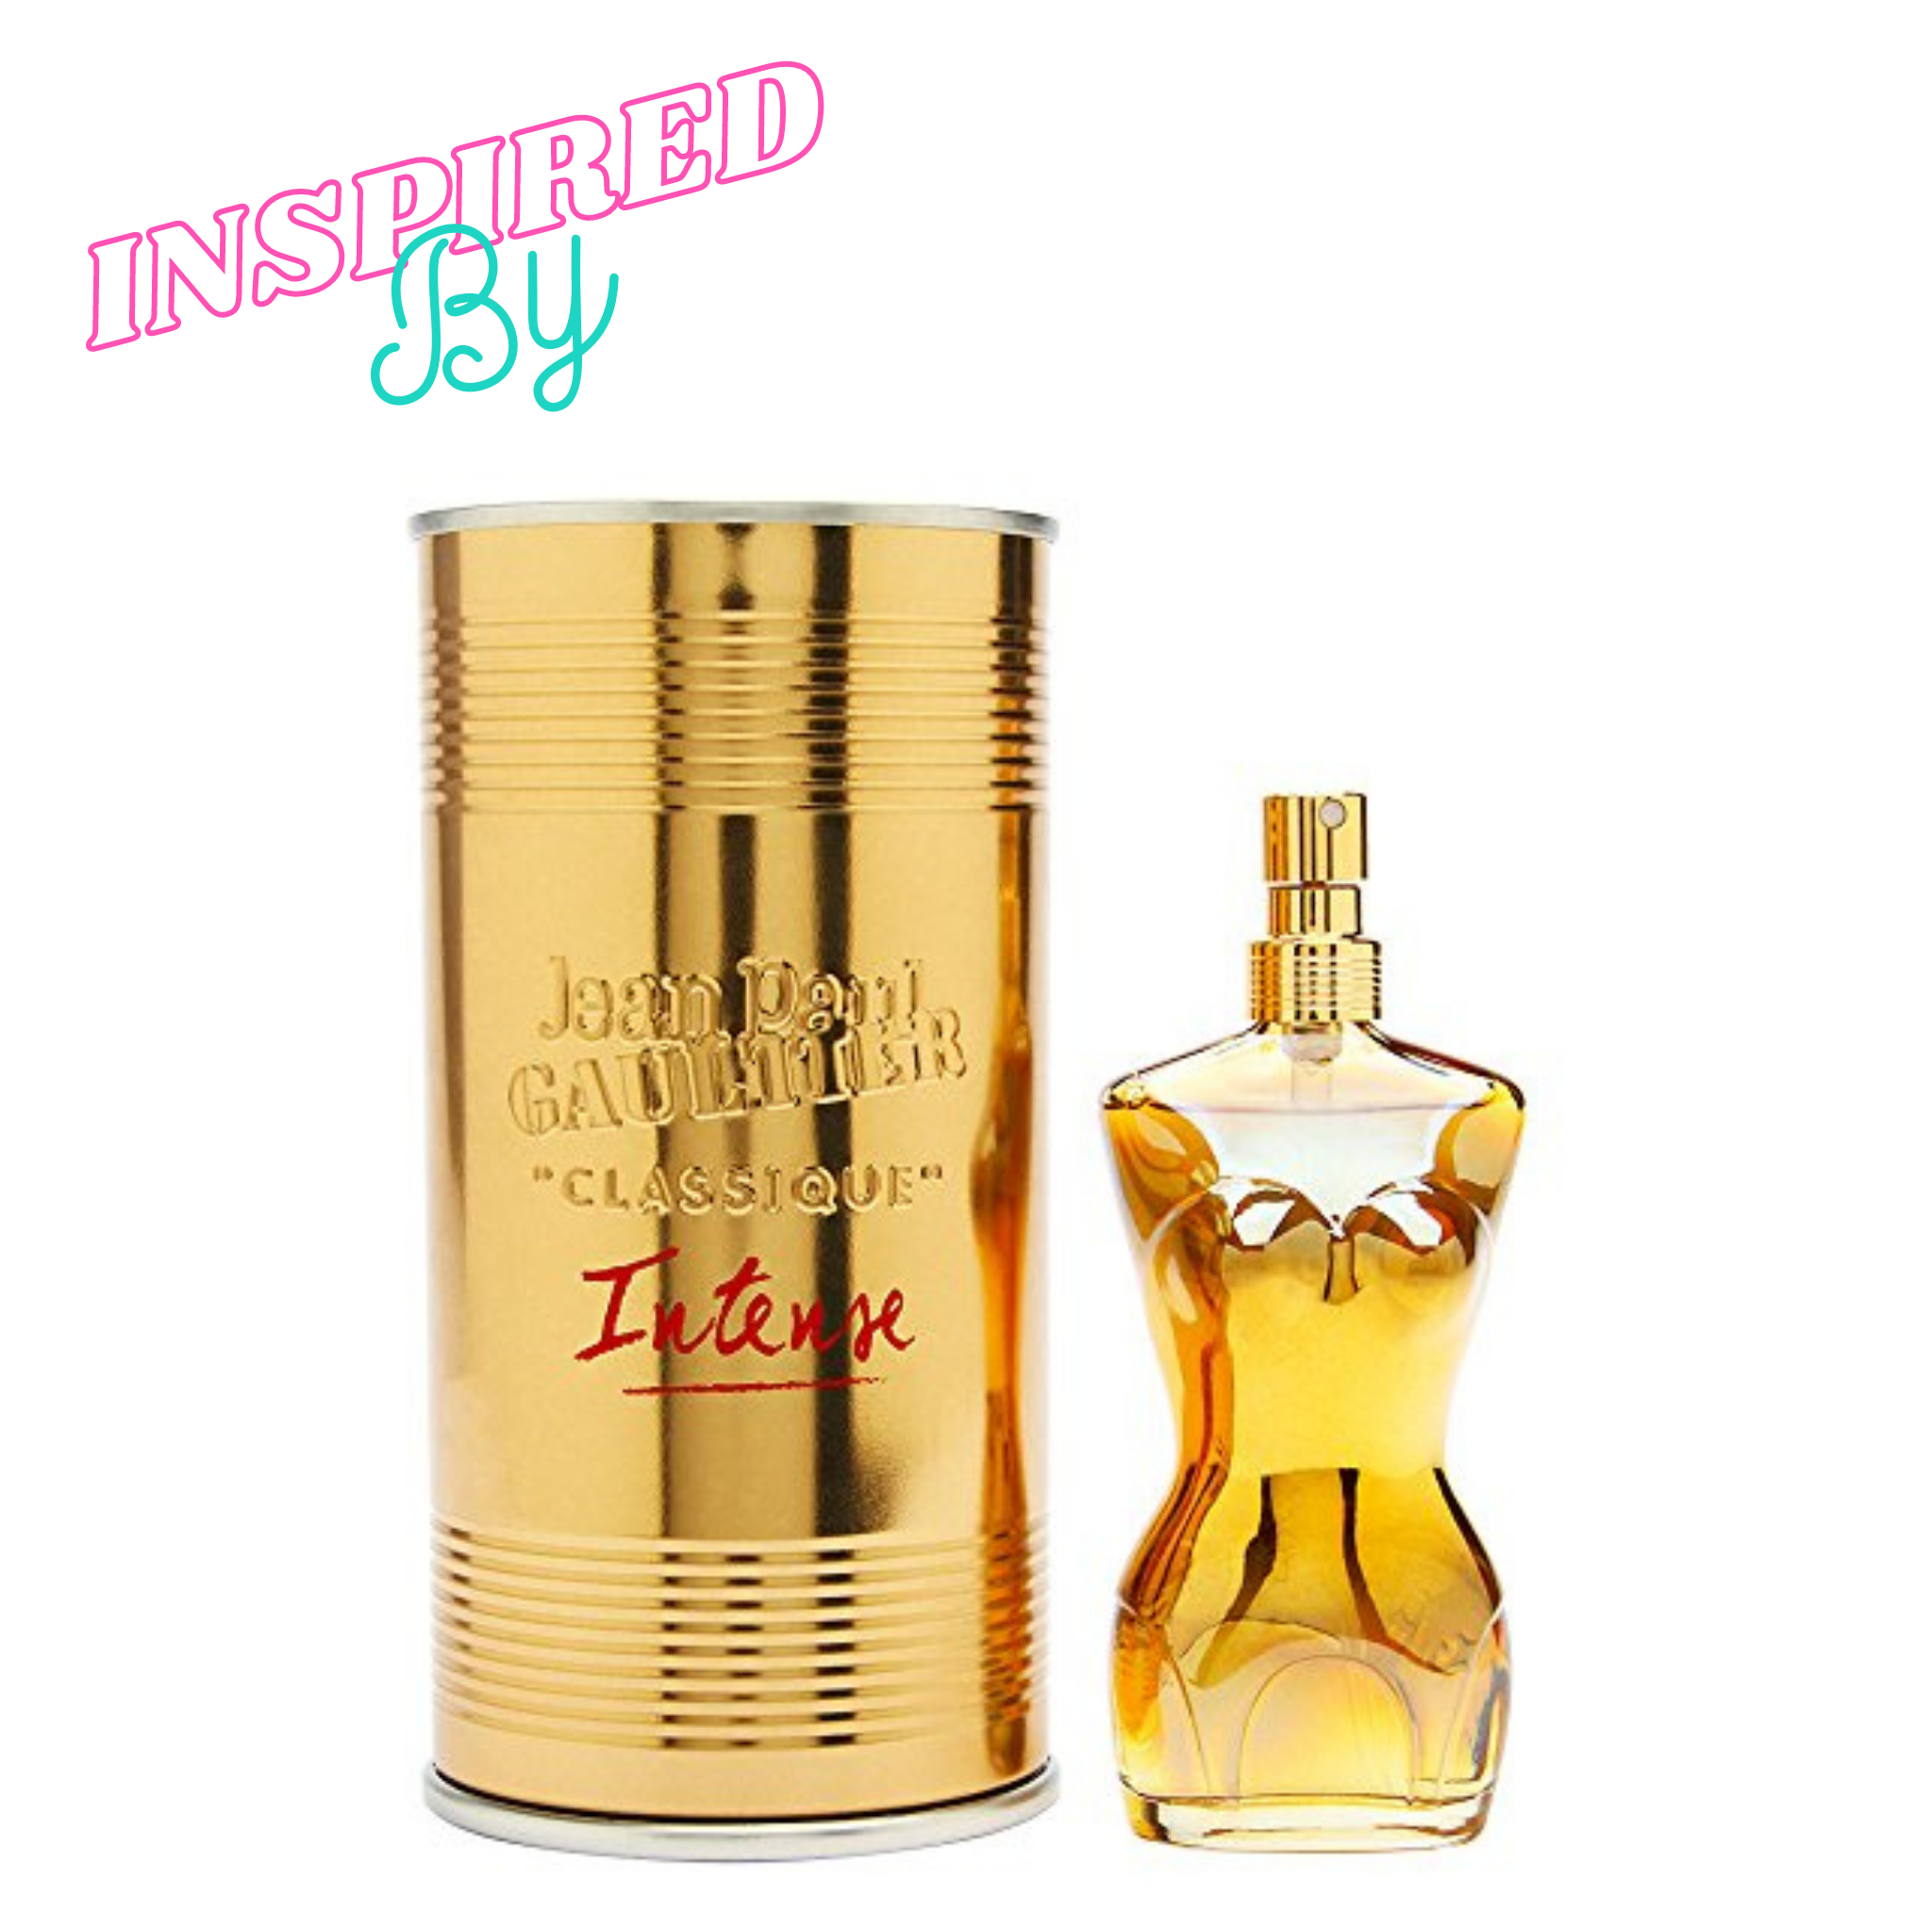 Inspired by JPG Classique Intense 100ml - Fragrance Deliver SA